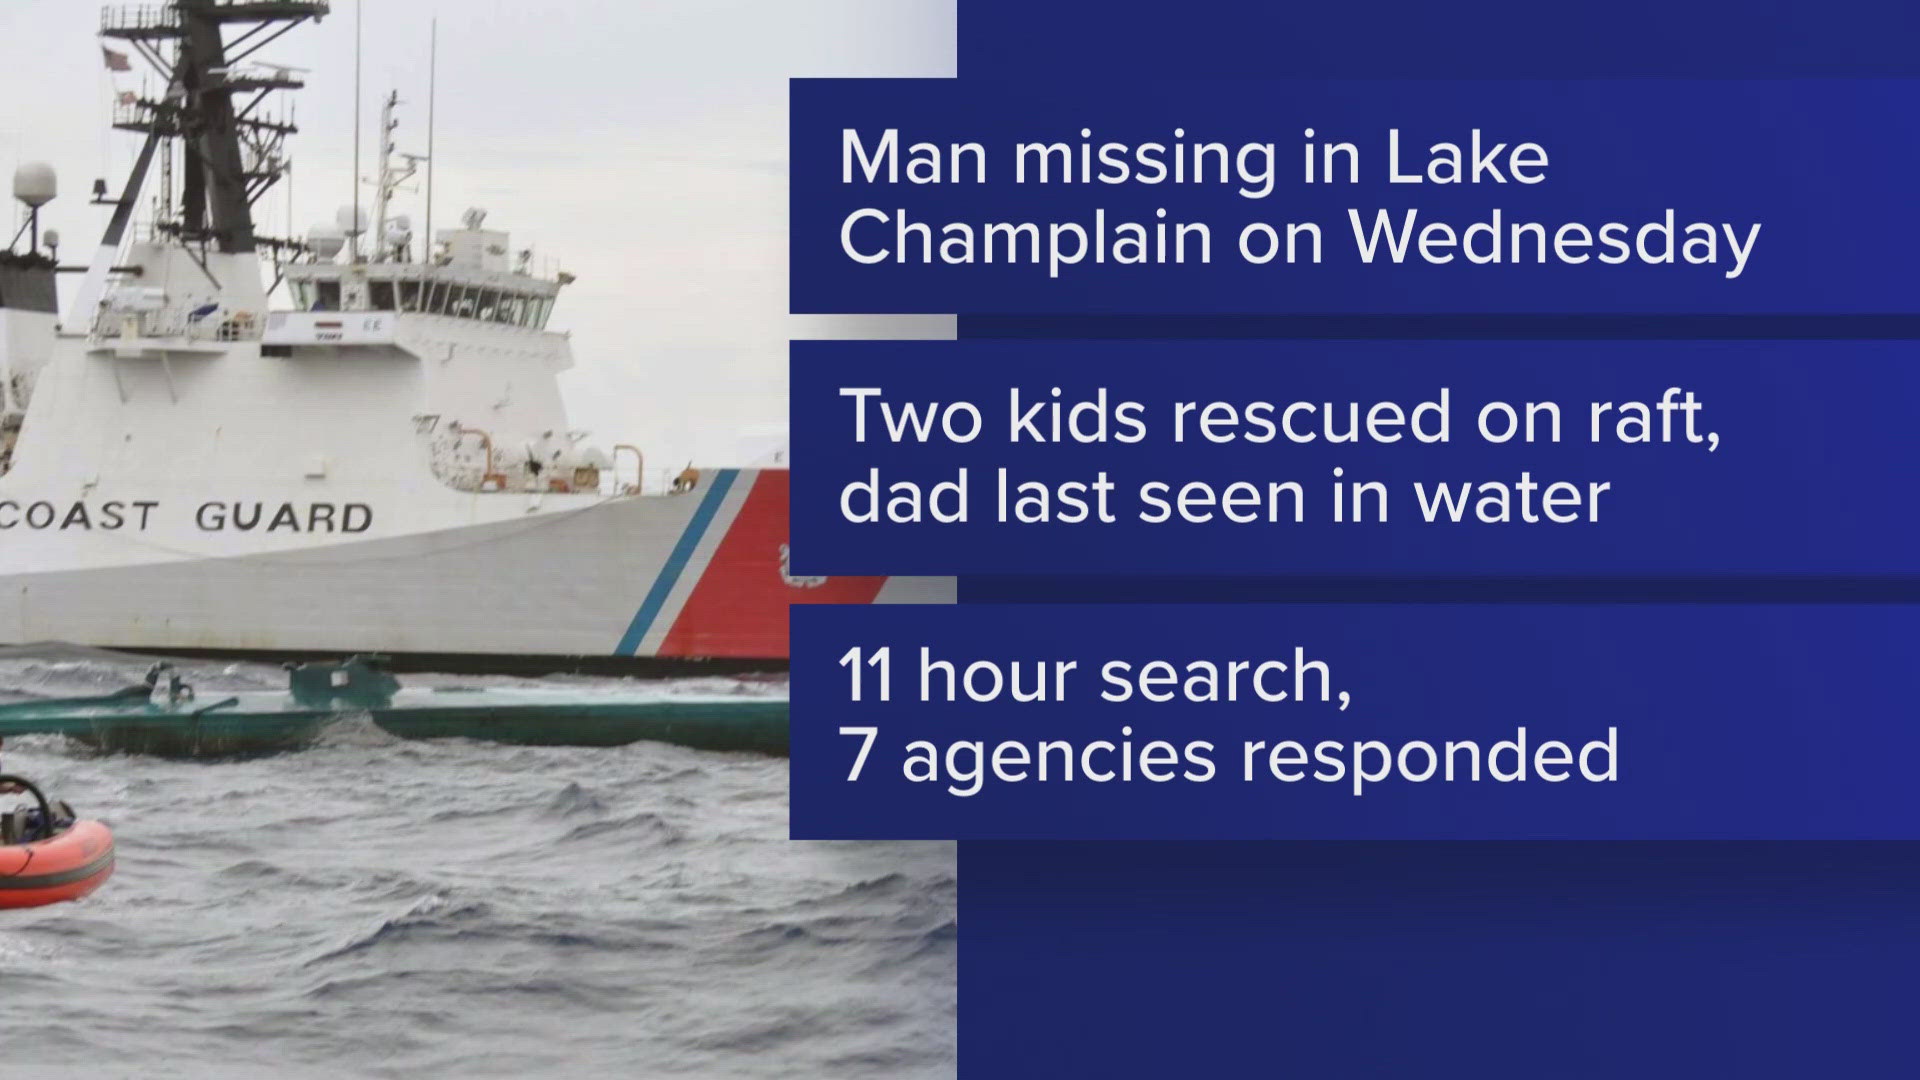 The New England Coast Guard said it has stopped its search for a boater who went missing Wednesday on Lake Champlain.